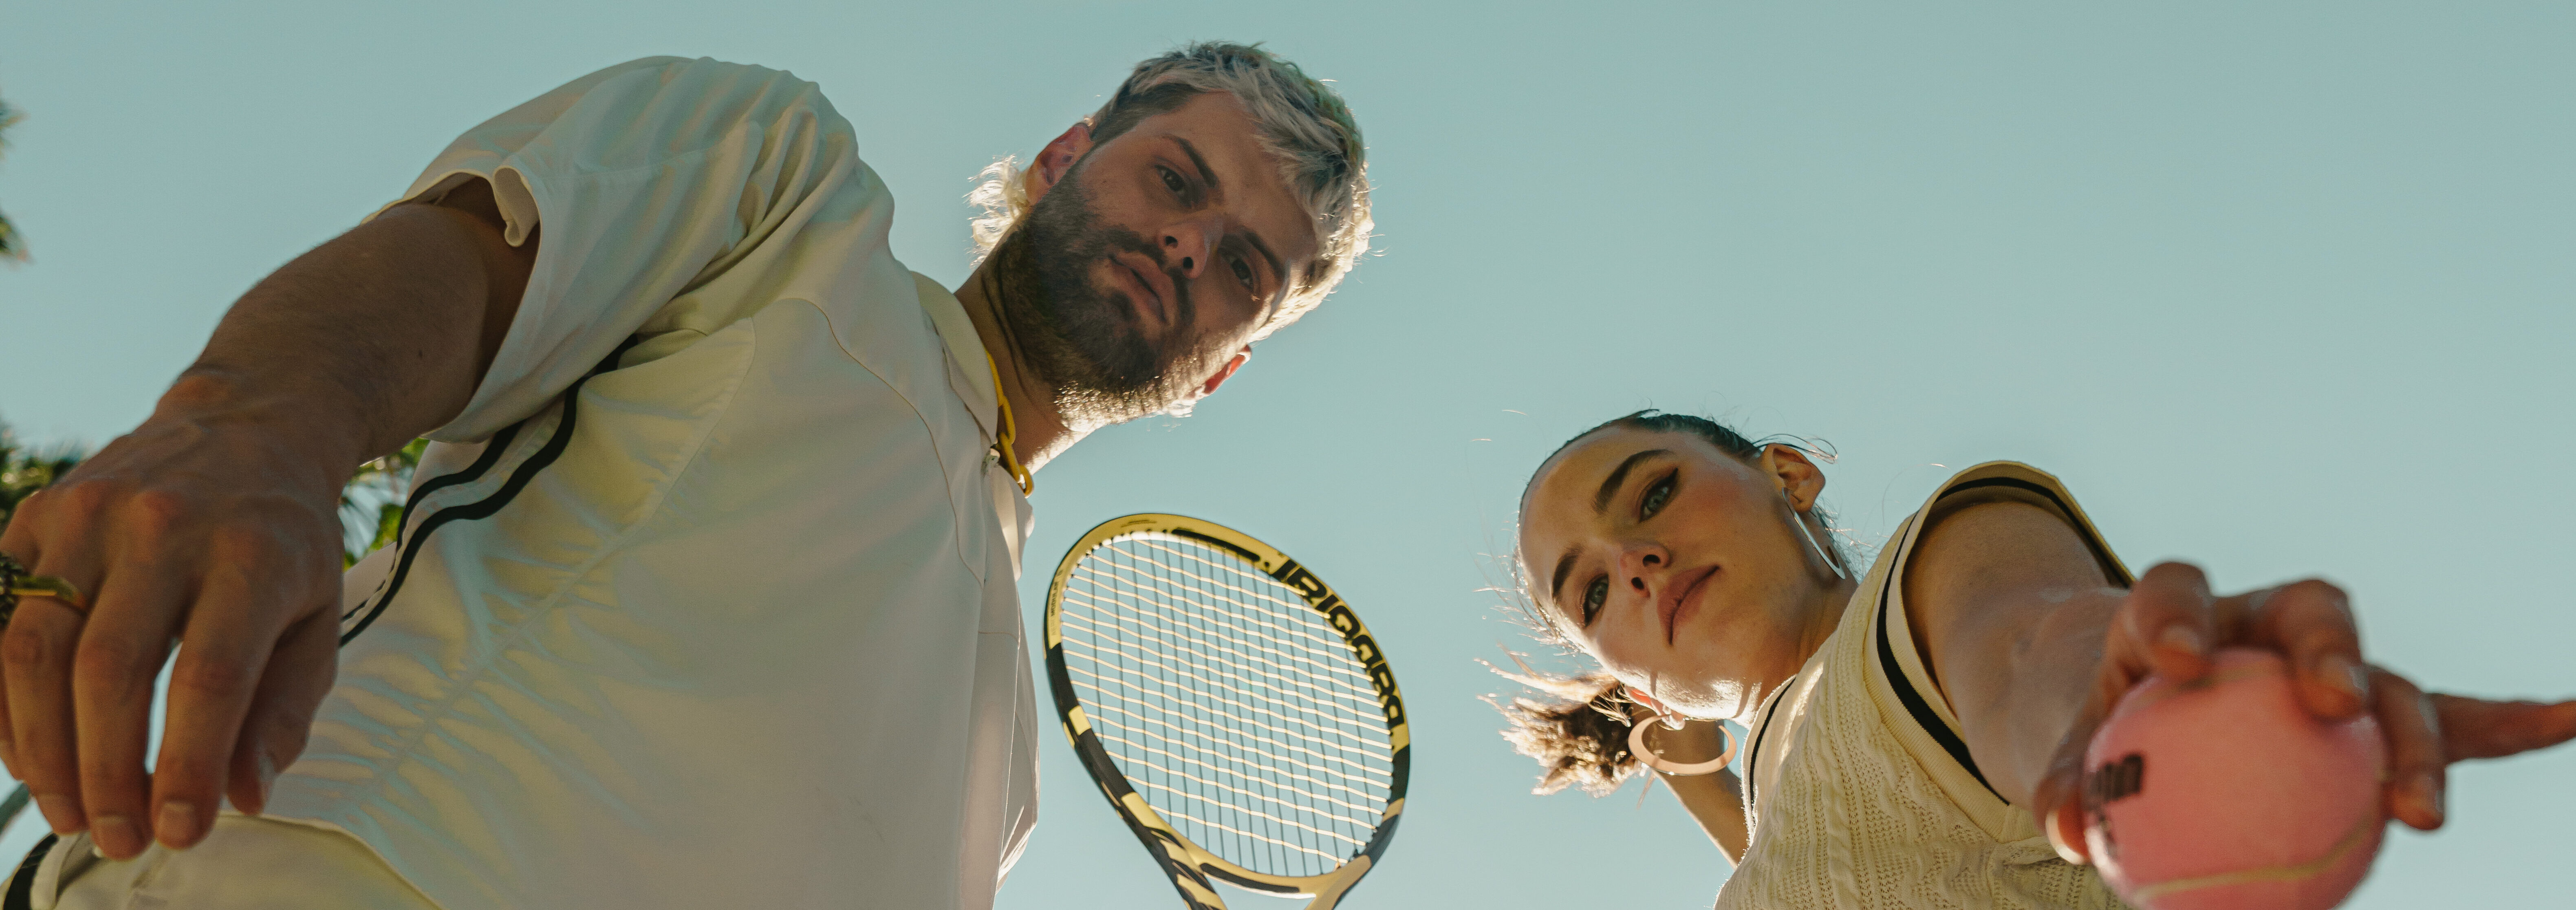 SOFI TUKKER Meaning Behind WET TENNIS and How It Landed ESPN Fame